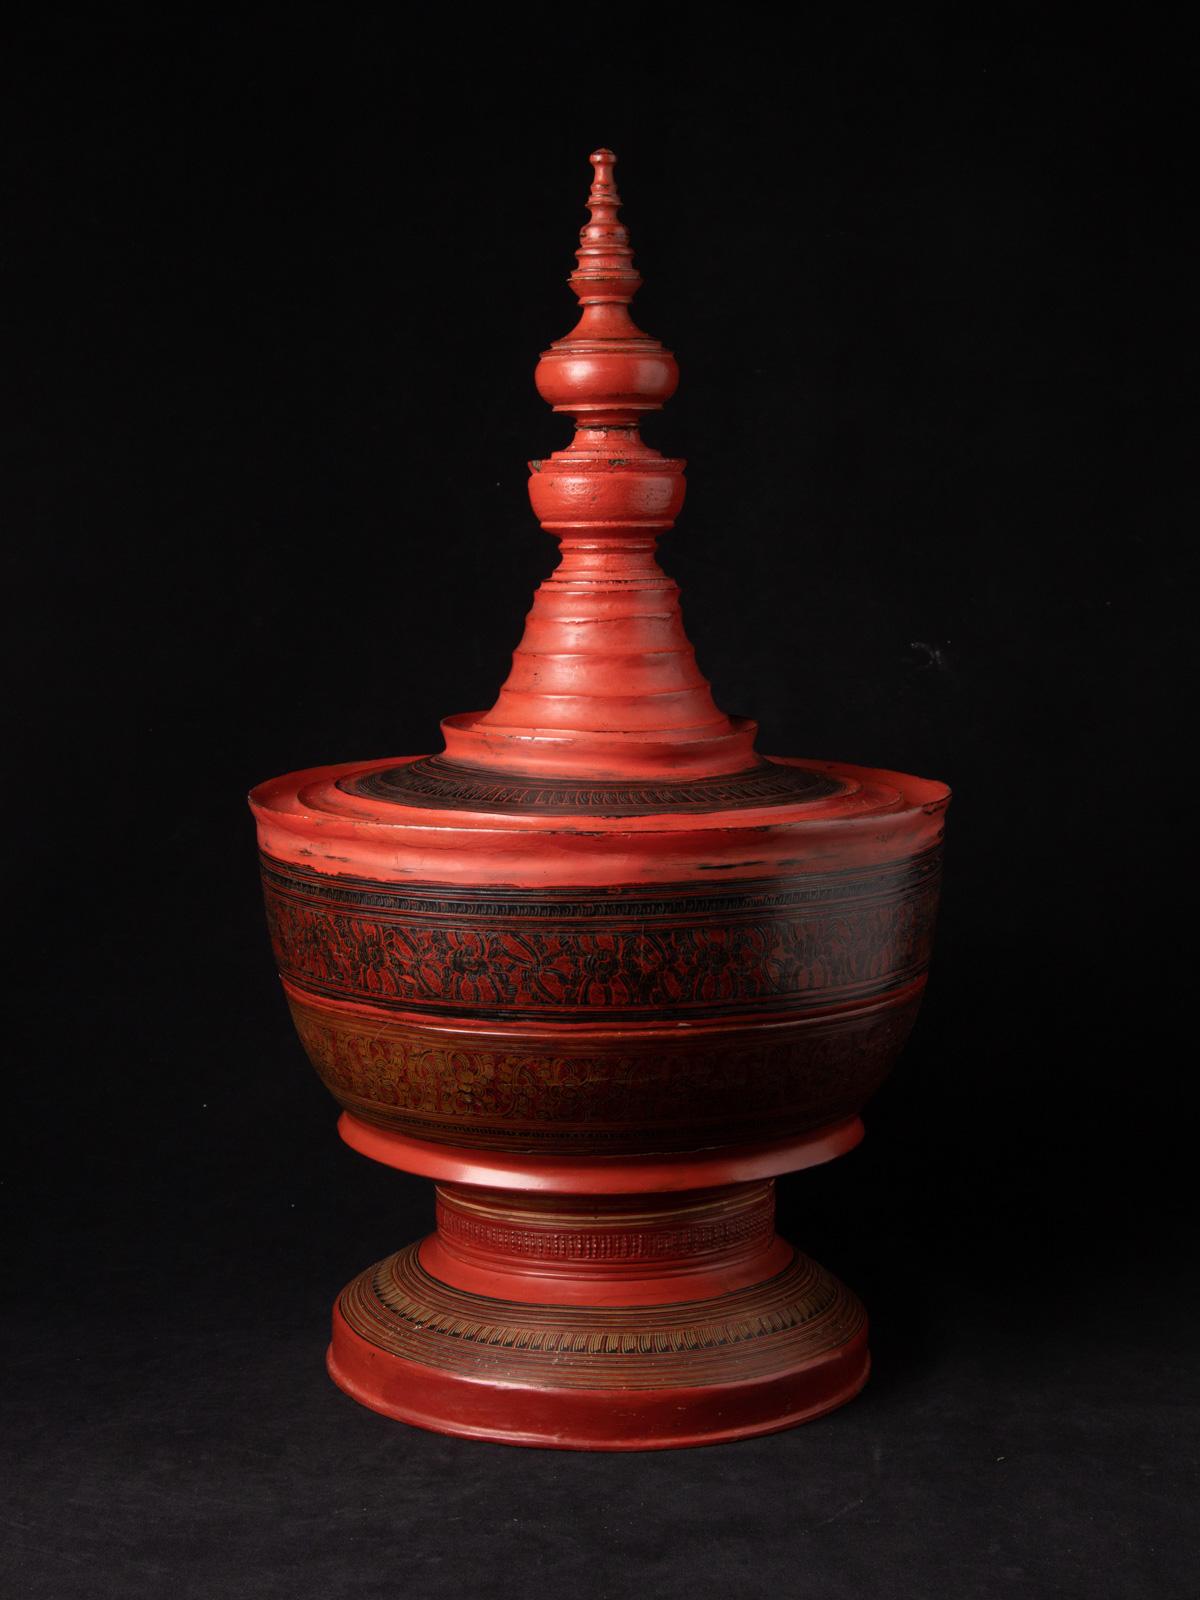 This antique lacquerware Burmese offering vessel is a truly unique and special collectible piece. Standing at 56.4 cm high and with a diameter of 31.3 cm, it is made of lacquerware and it weighs 1.75 kgs. This statue is believed to originate from